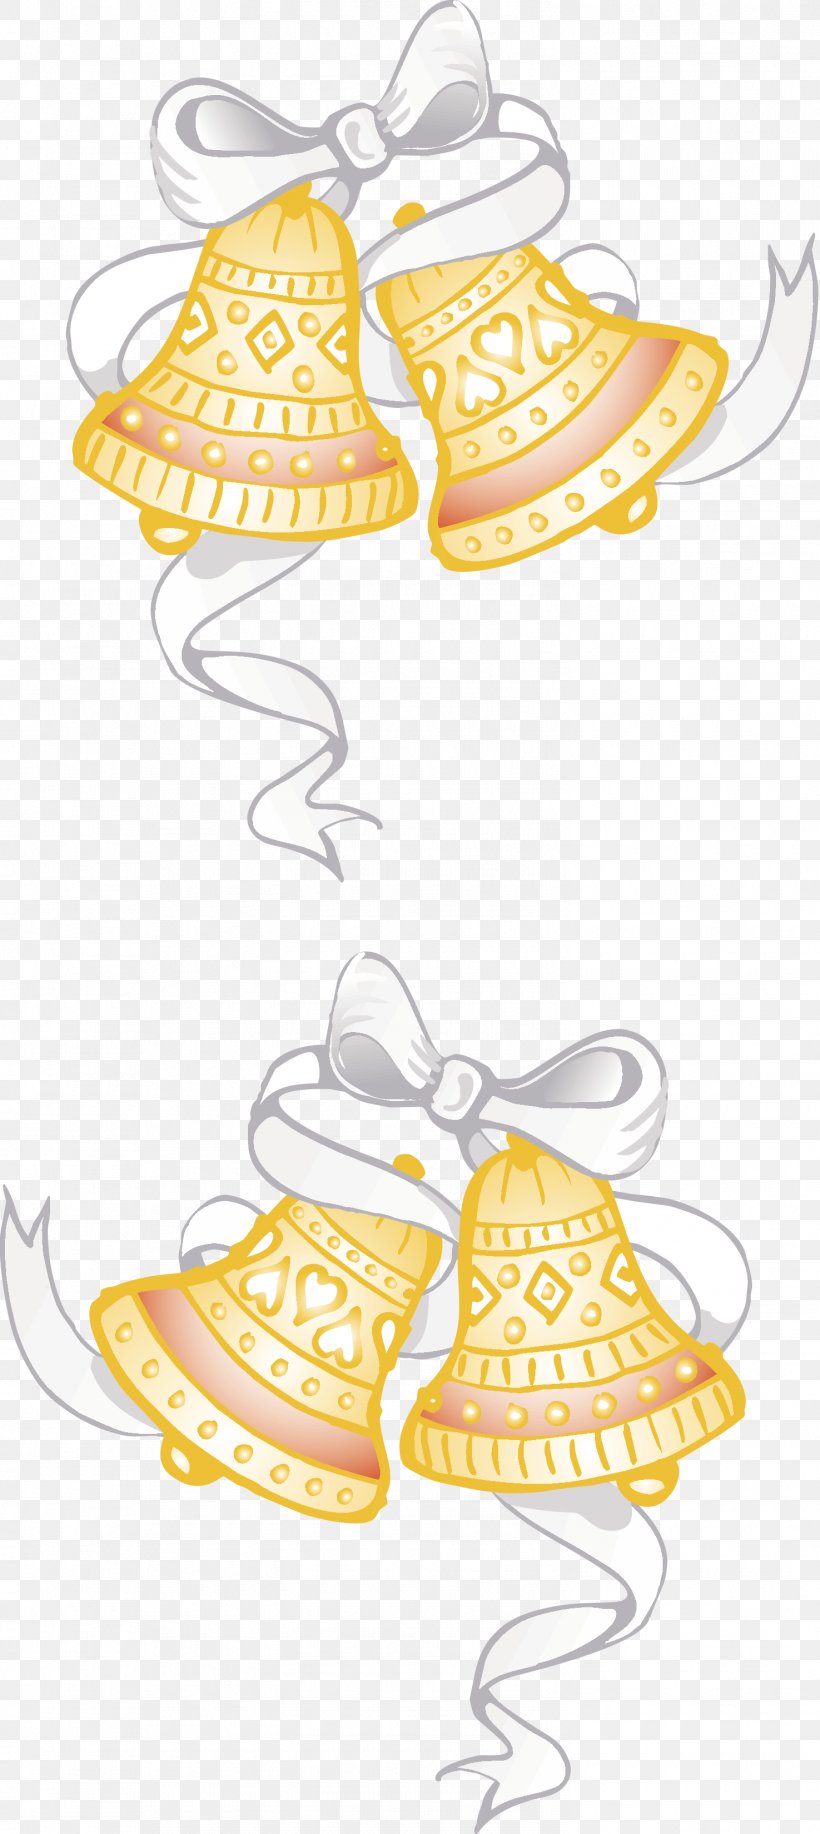 Wedding Invitation Bell Clip Art, PNG, 1475x3300px, Wedding Invitation, Artwork, Bell, Bride, Church Bell Download Free